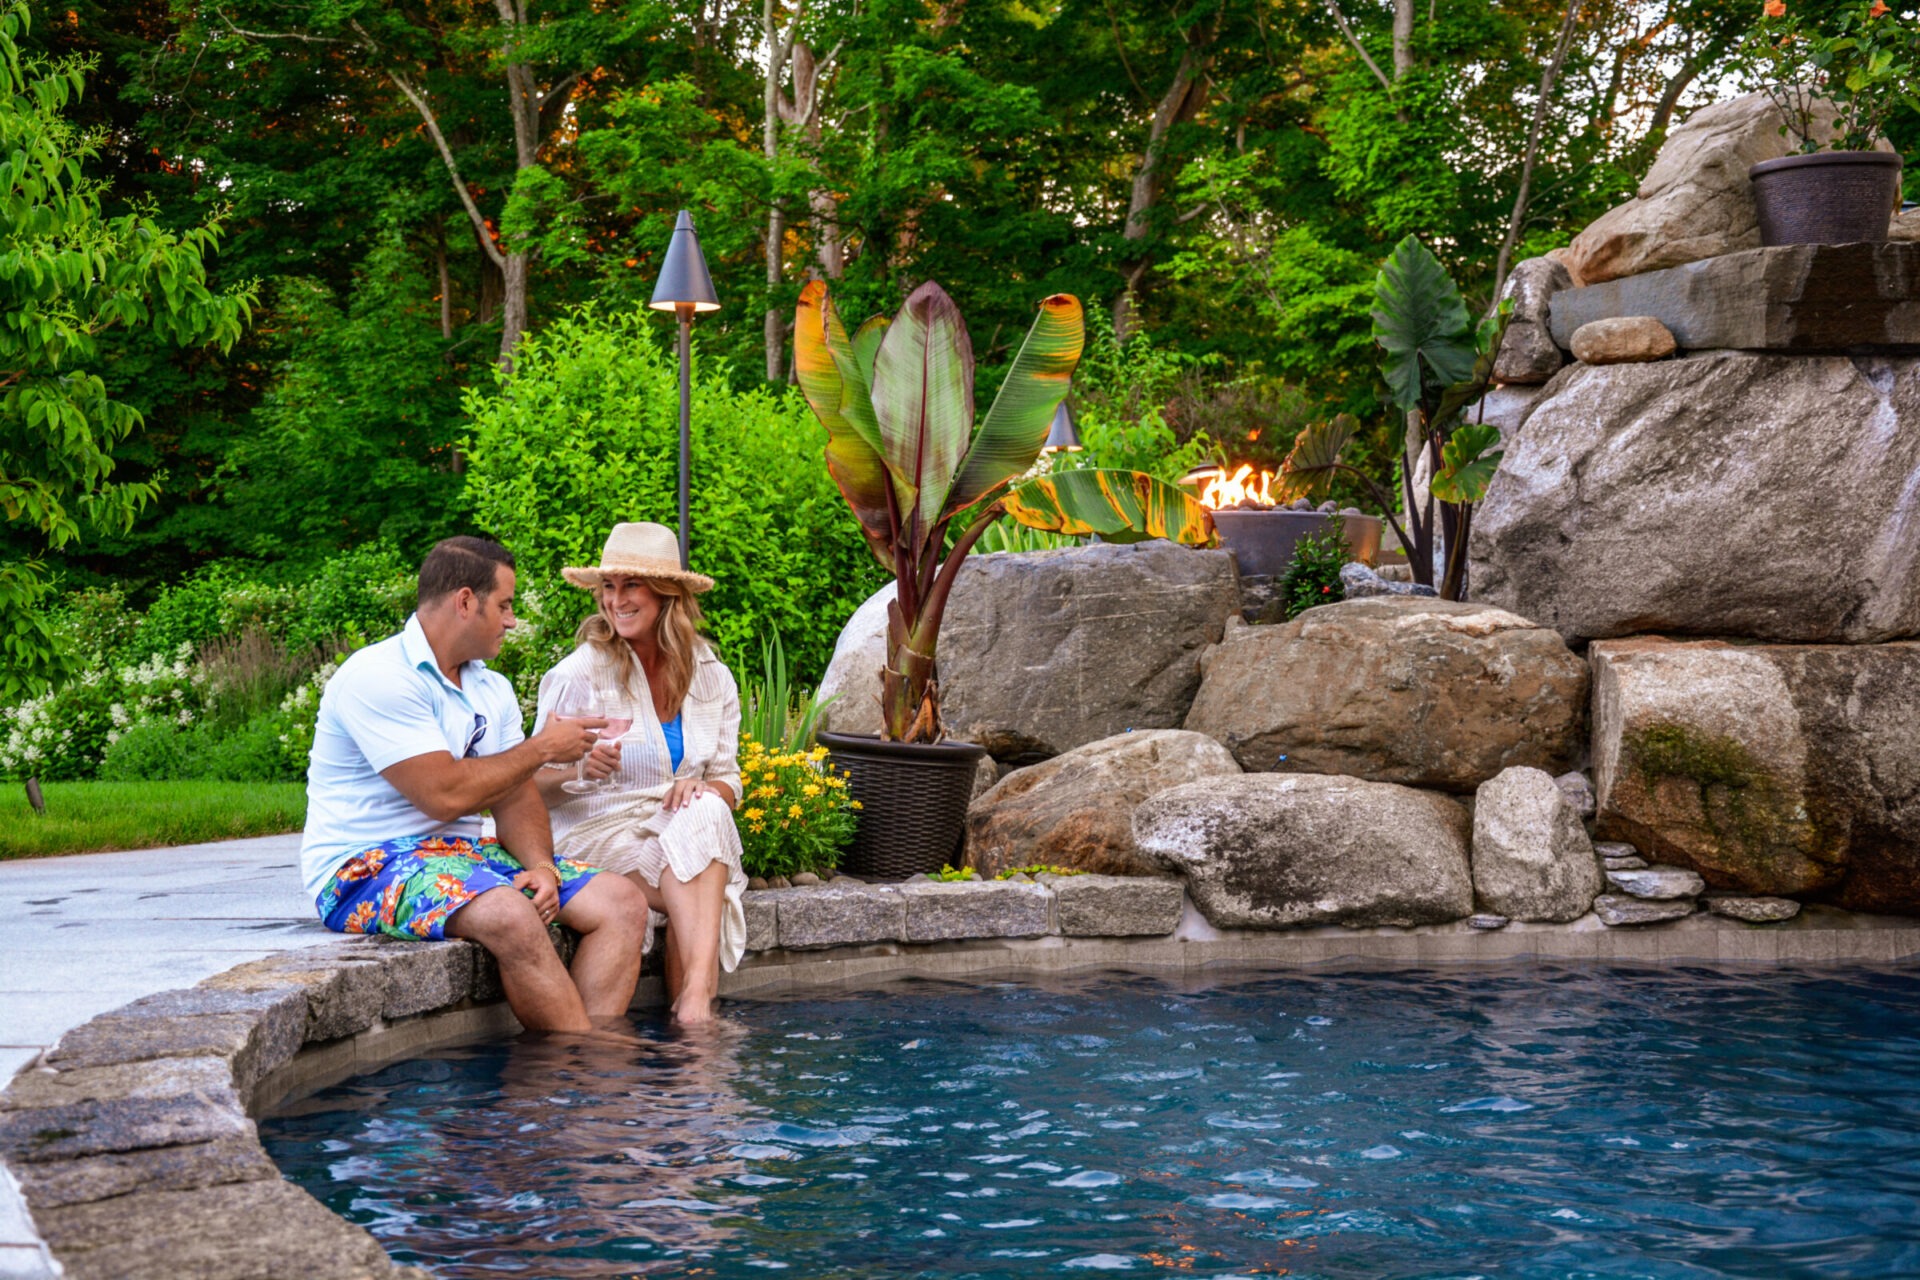 Two people are sitting by a pool with their feet in the water, enjoying drinks and smiling, surrounded by rocks, plants, and a fire feature.